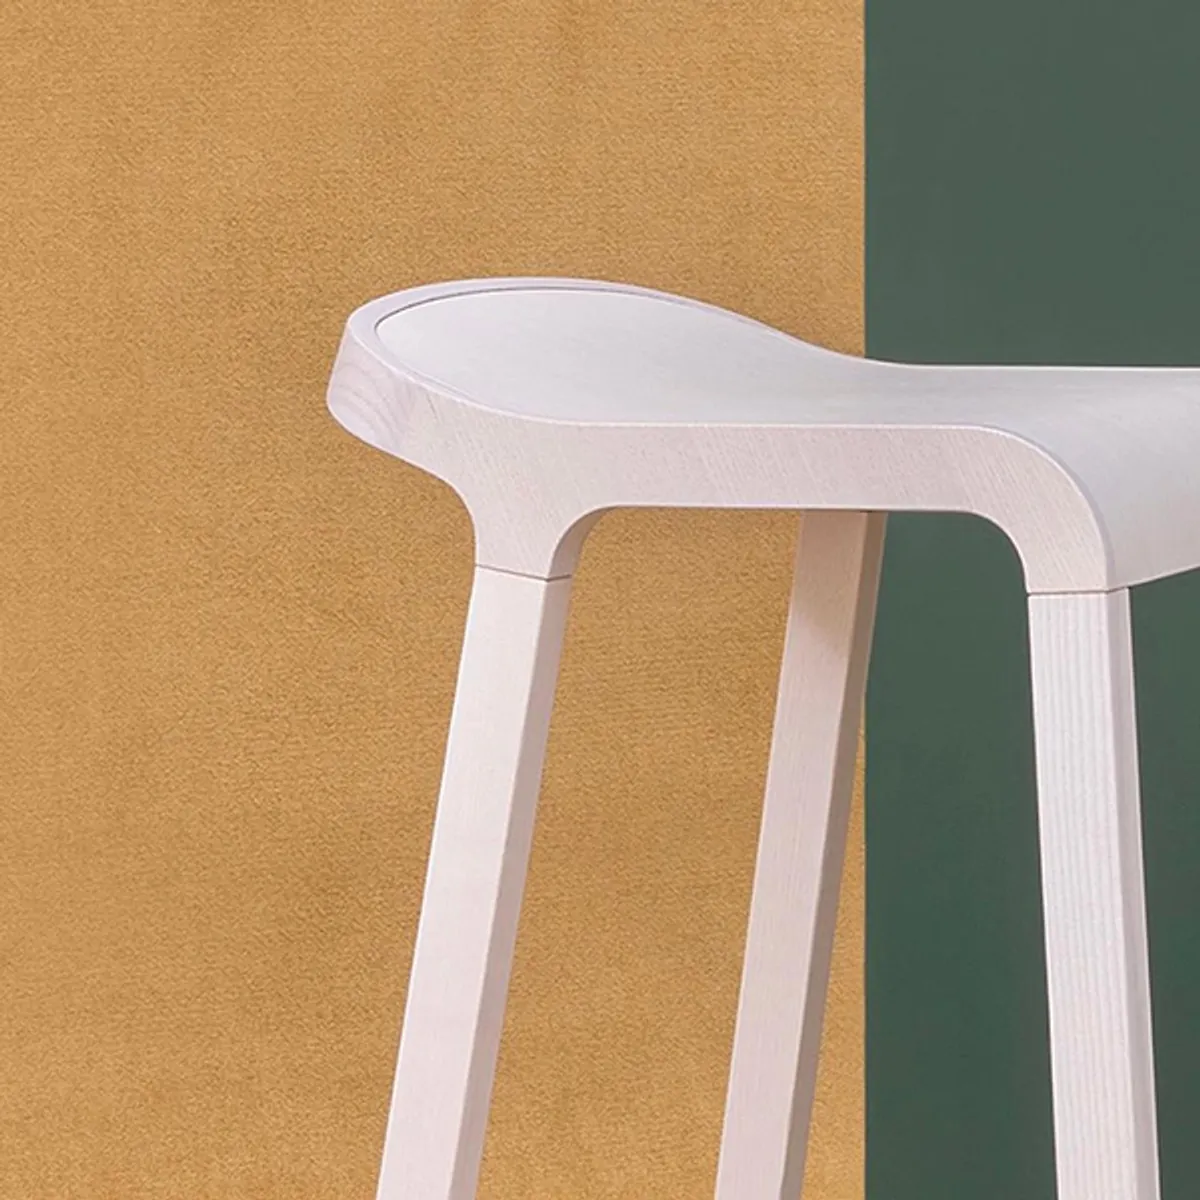 Swell Bar Stool Wooden Scandi Design Inside Out Contracts